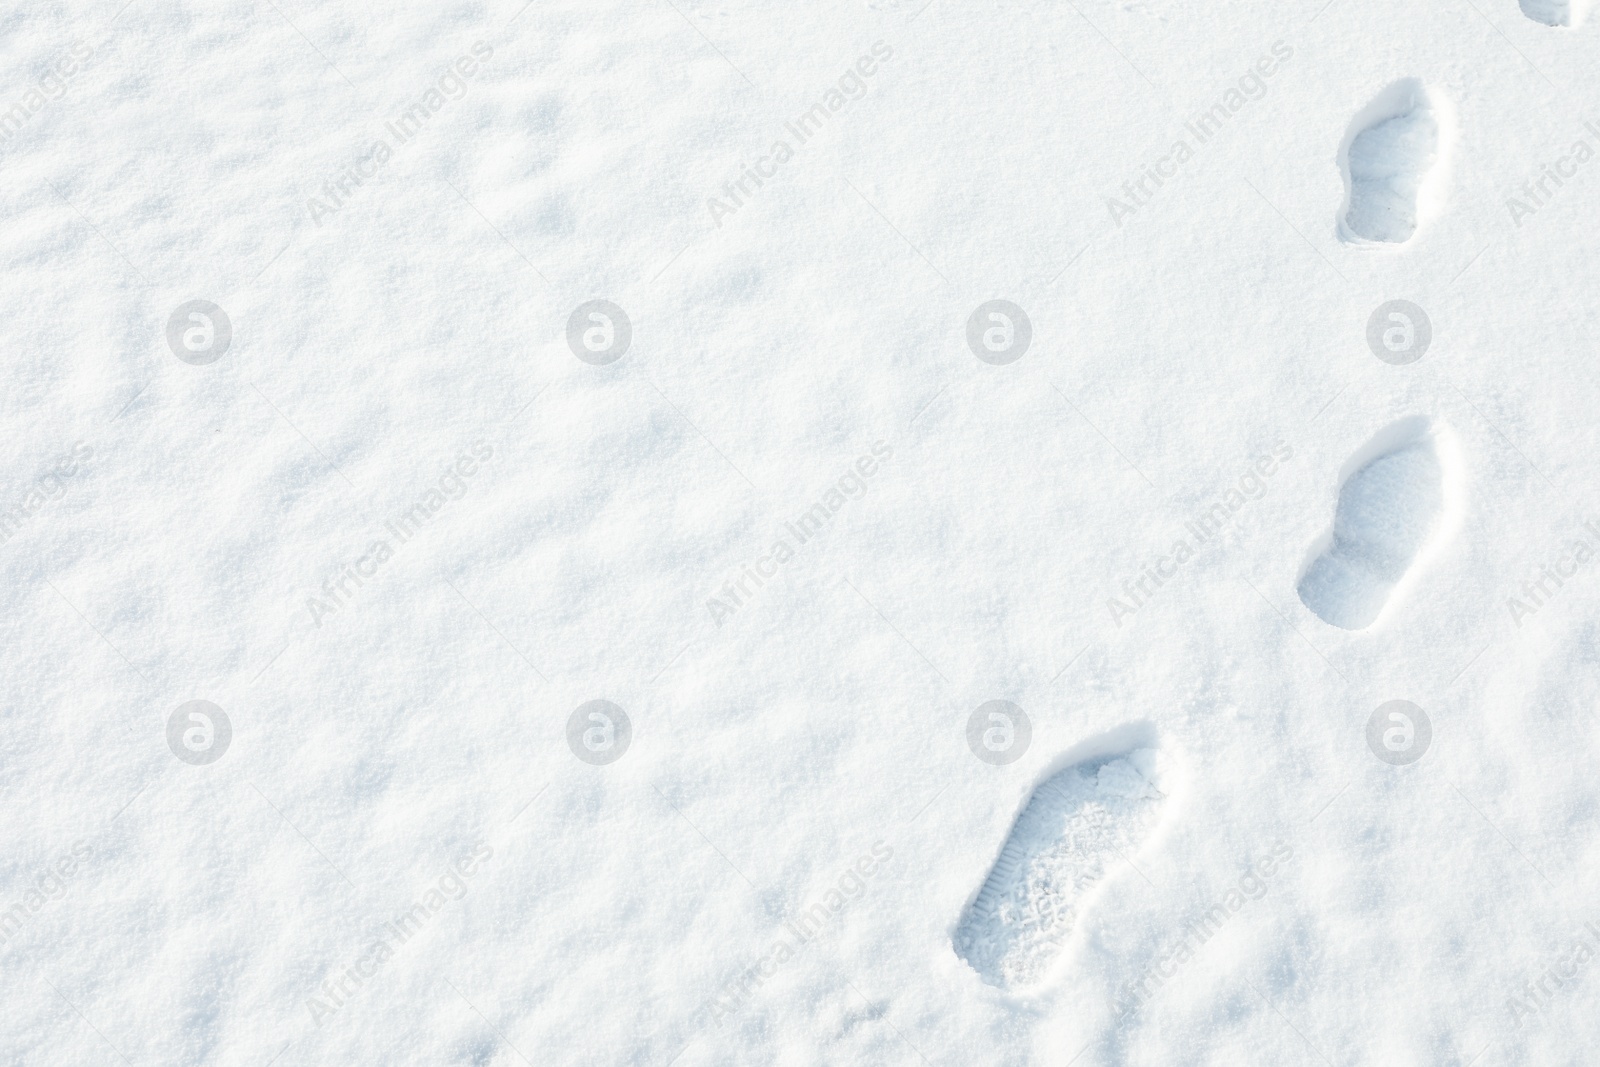 Photo of Footprints on white snow outdoors, space for text. Winter weather